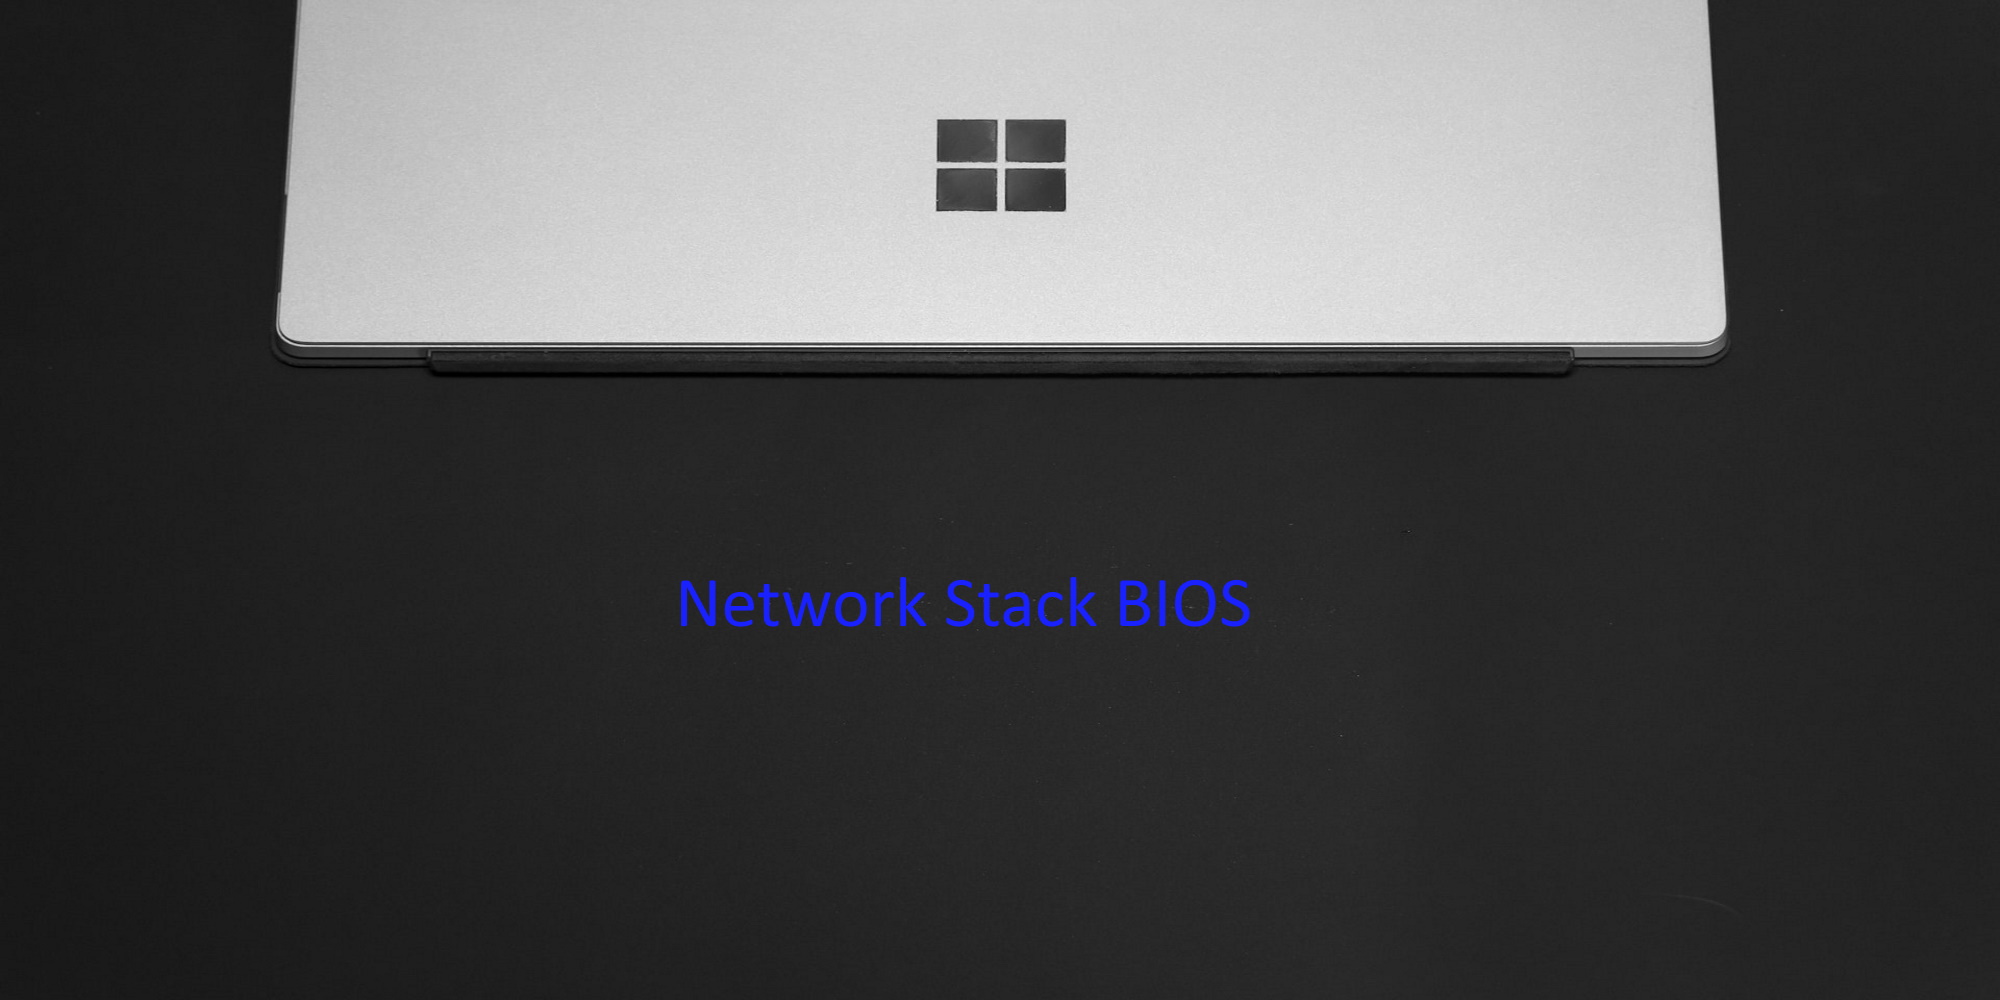 What Is Network Stack BIOS